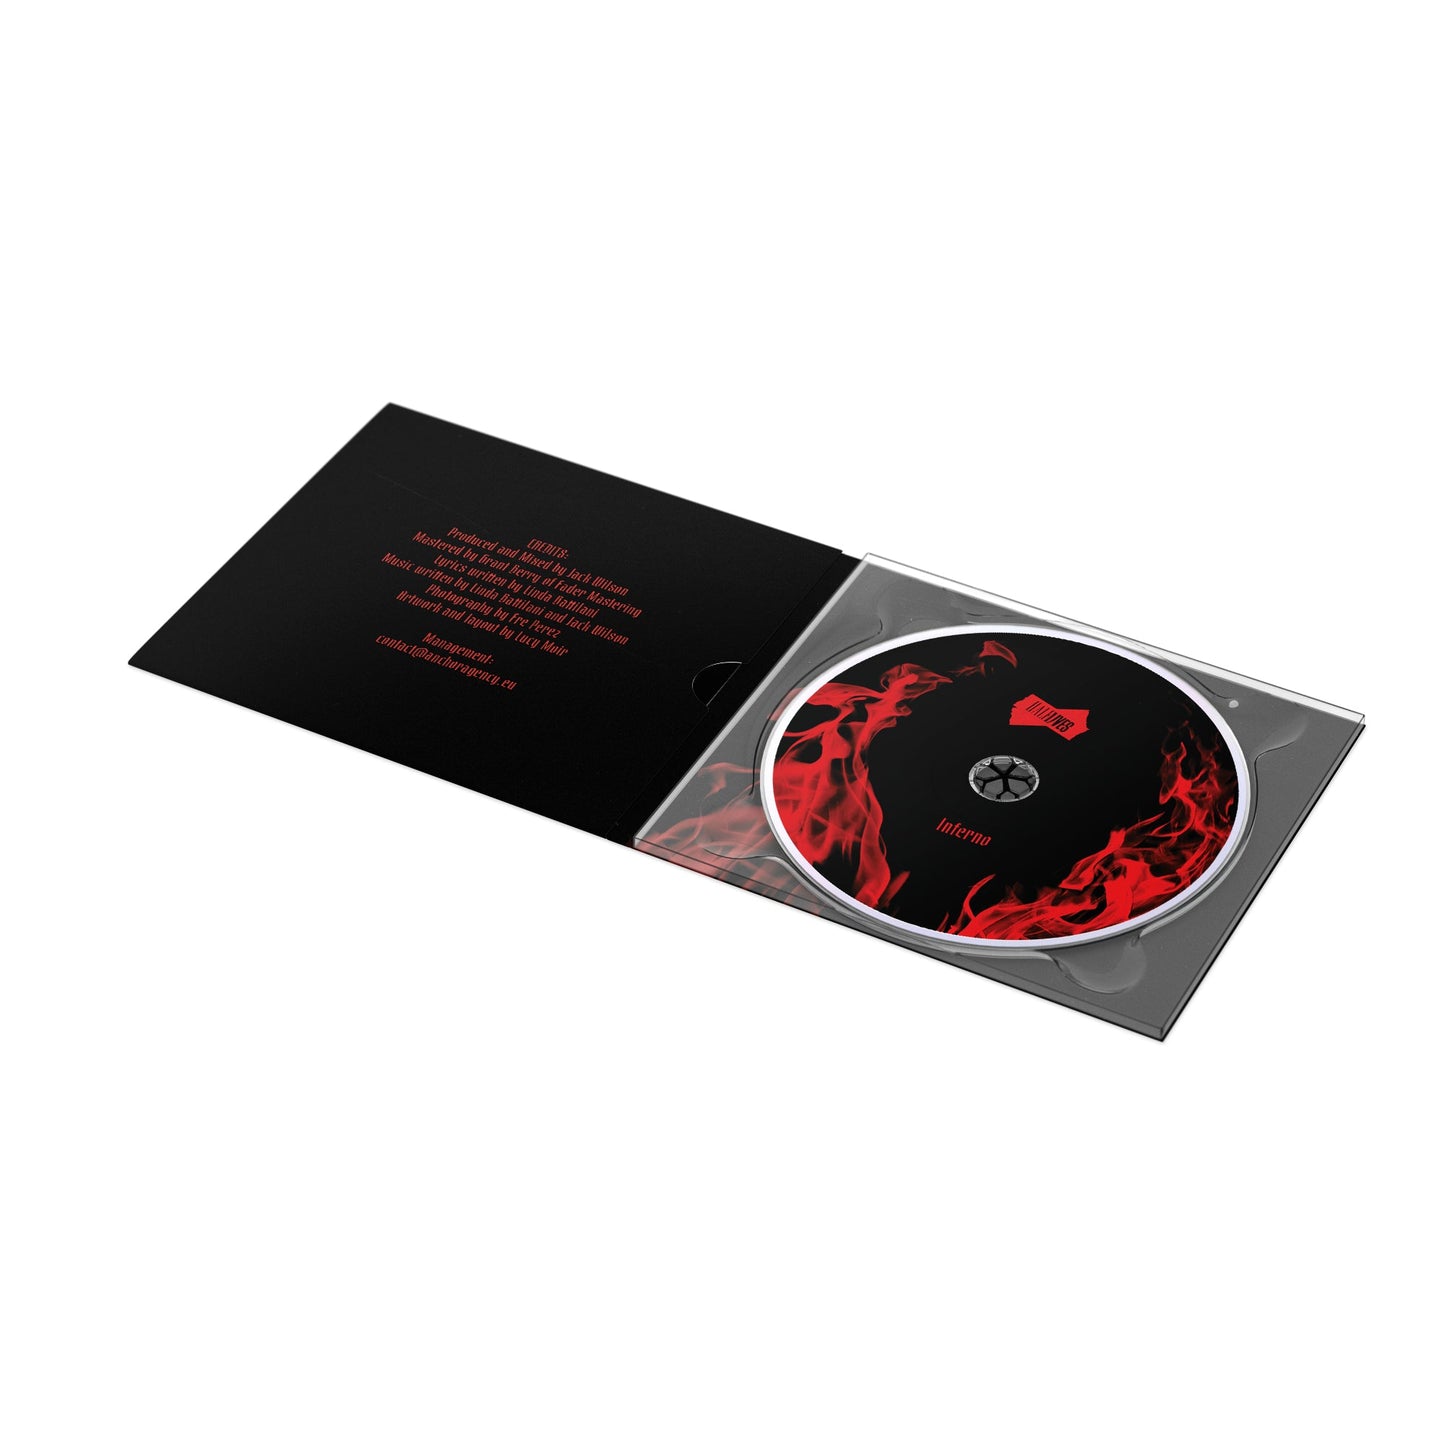 Inferno CD (Physical Copy)